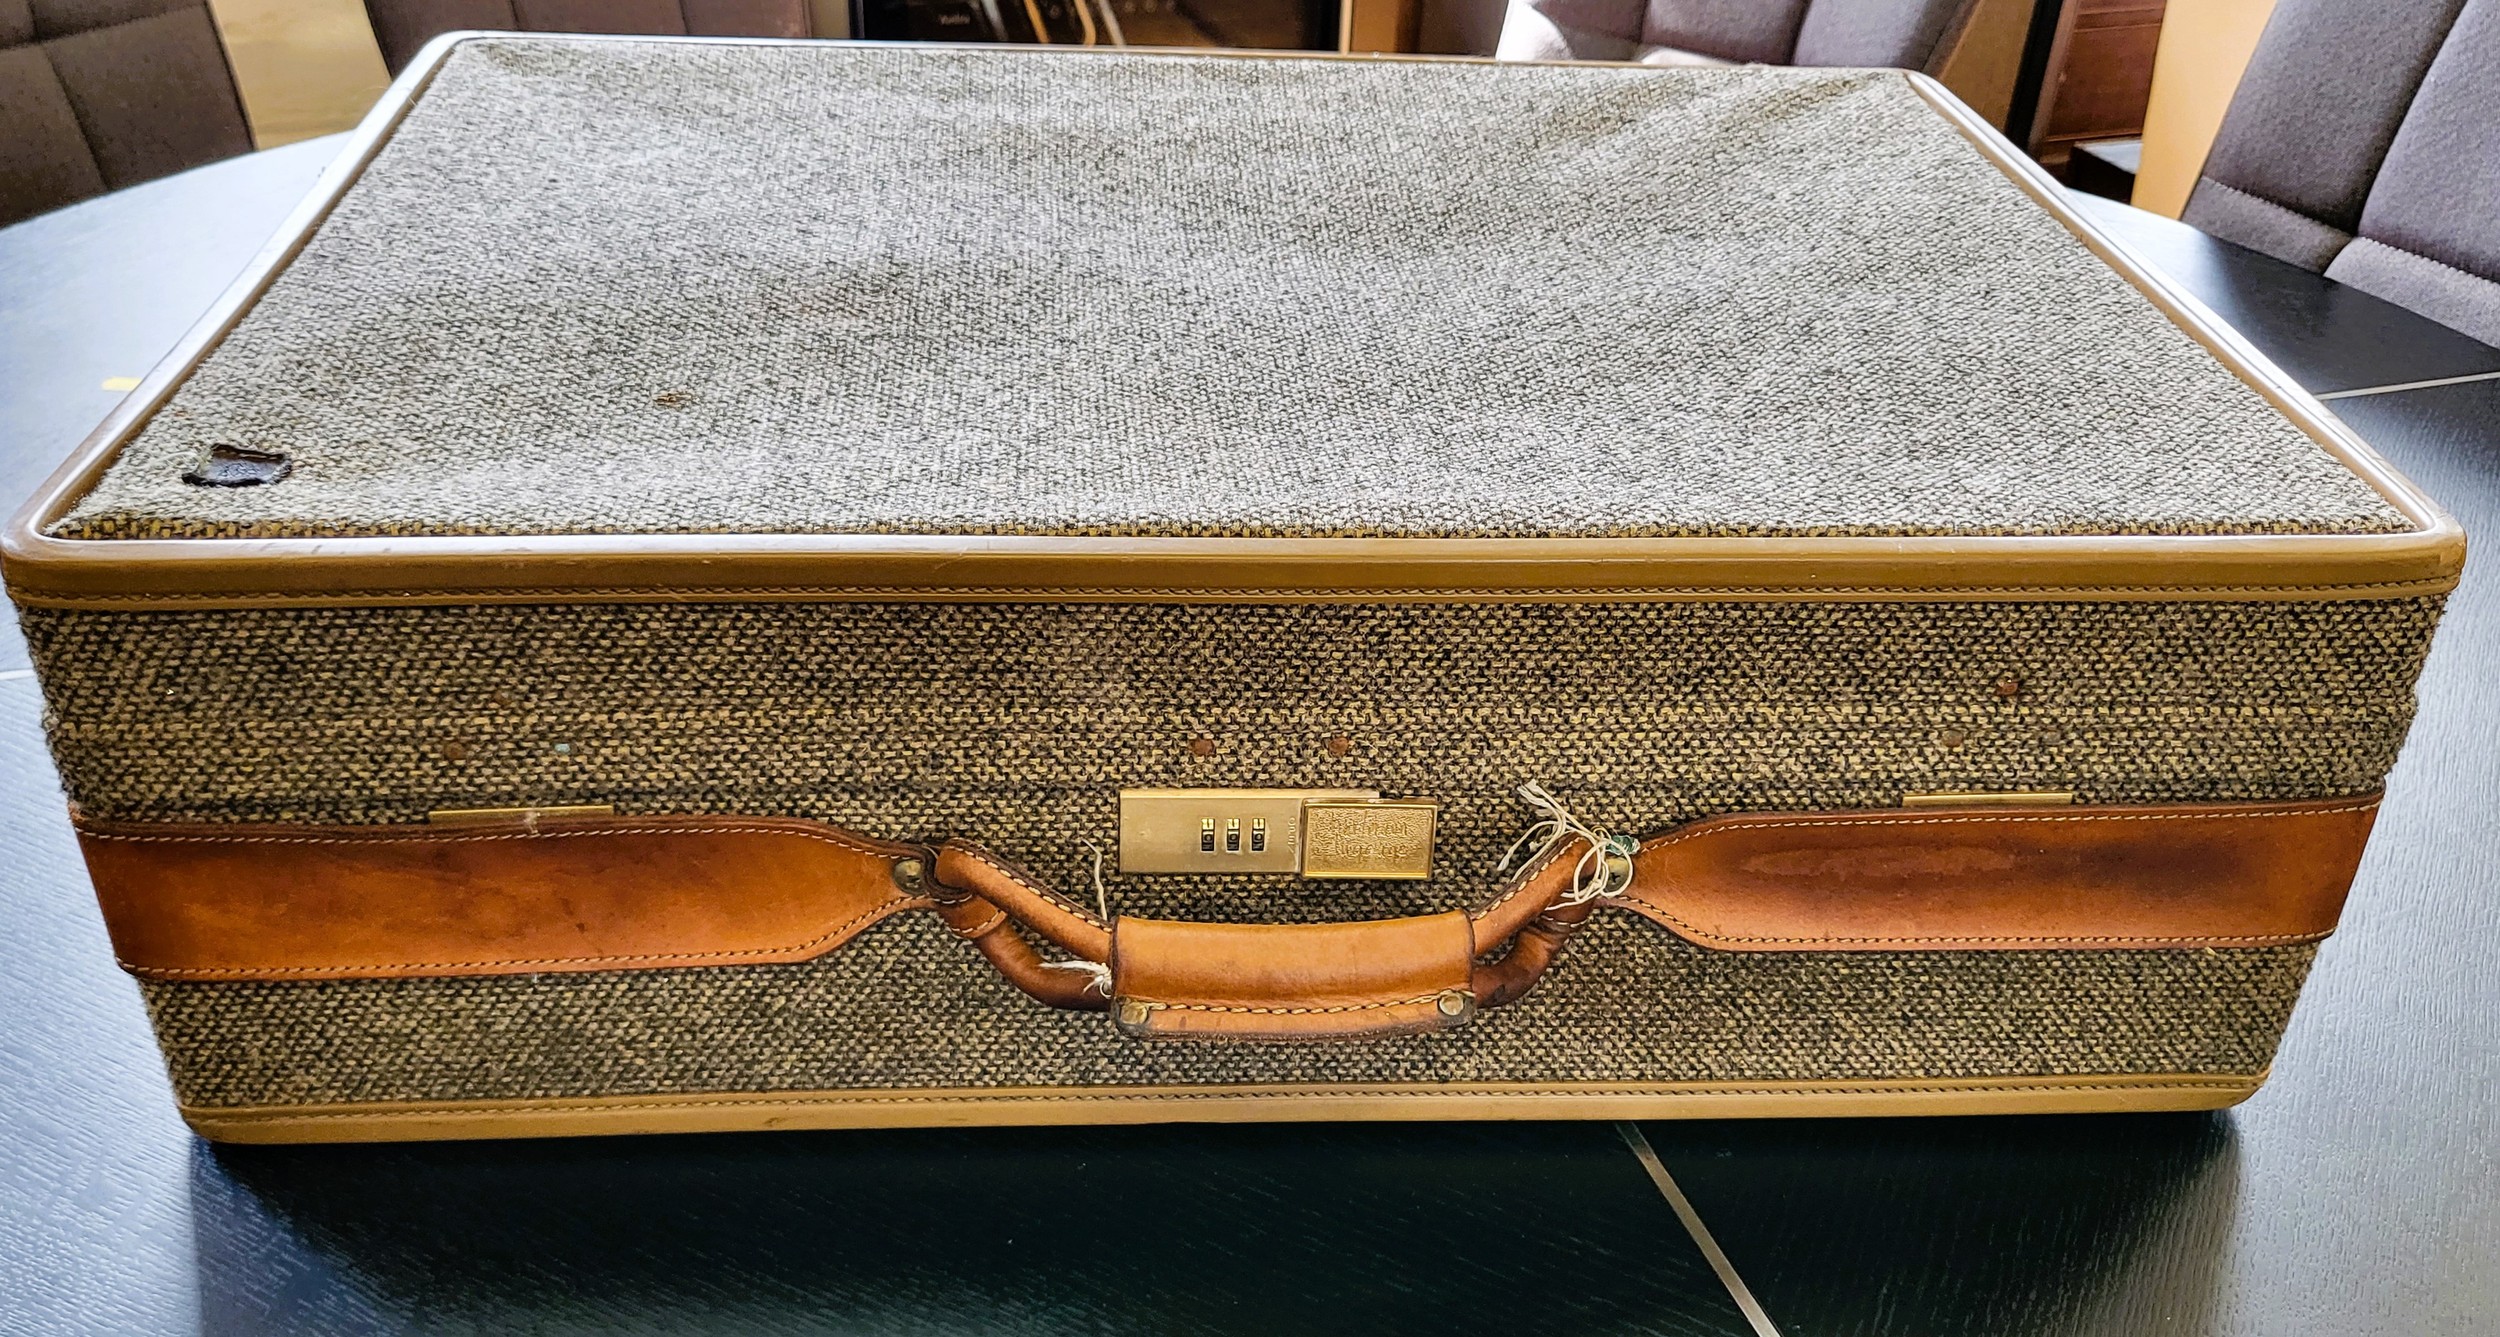 A Hertman suitcase, covered in grey fabric with brown leather straps.